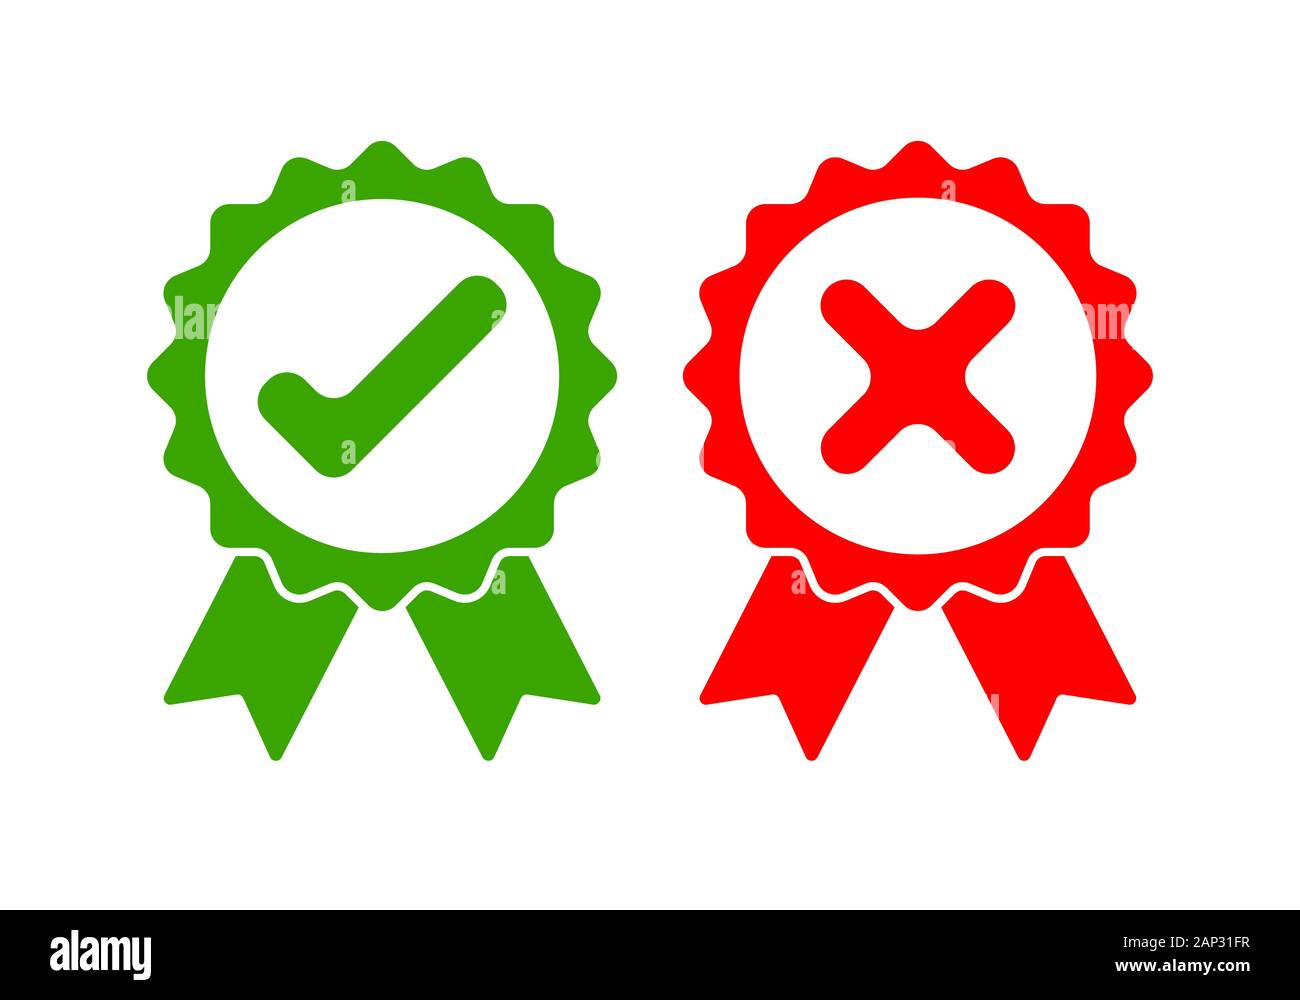 Green approved and red rejected icons. Check mark and cross mark on white background. Vector illustration. Stock Vector